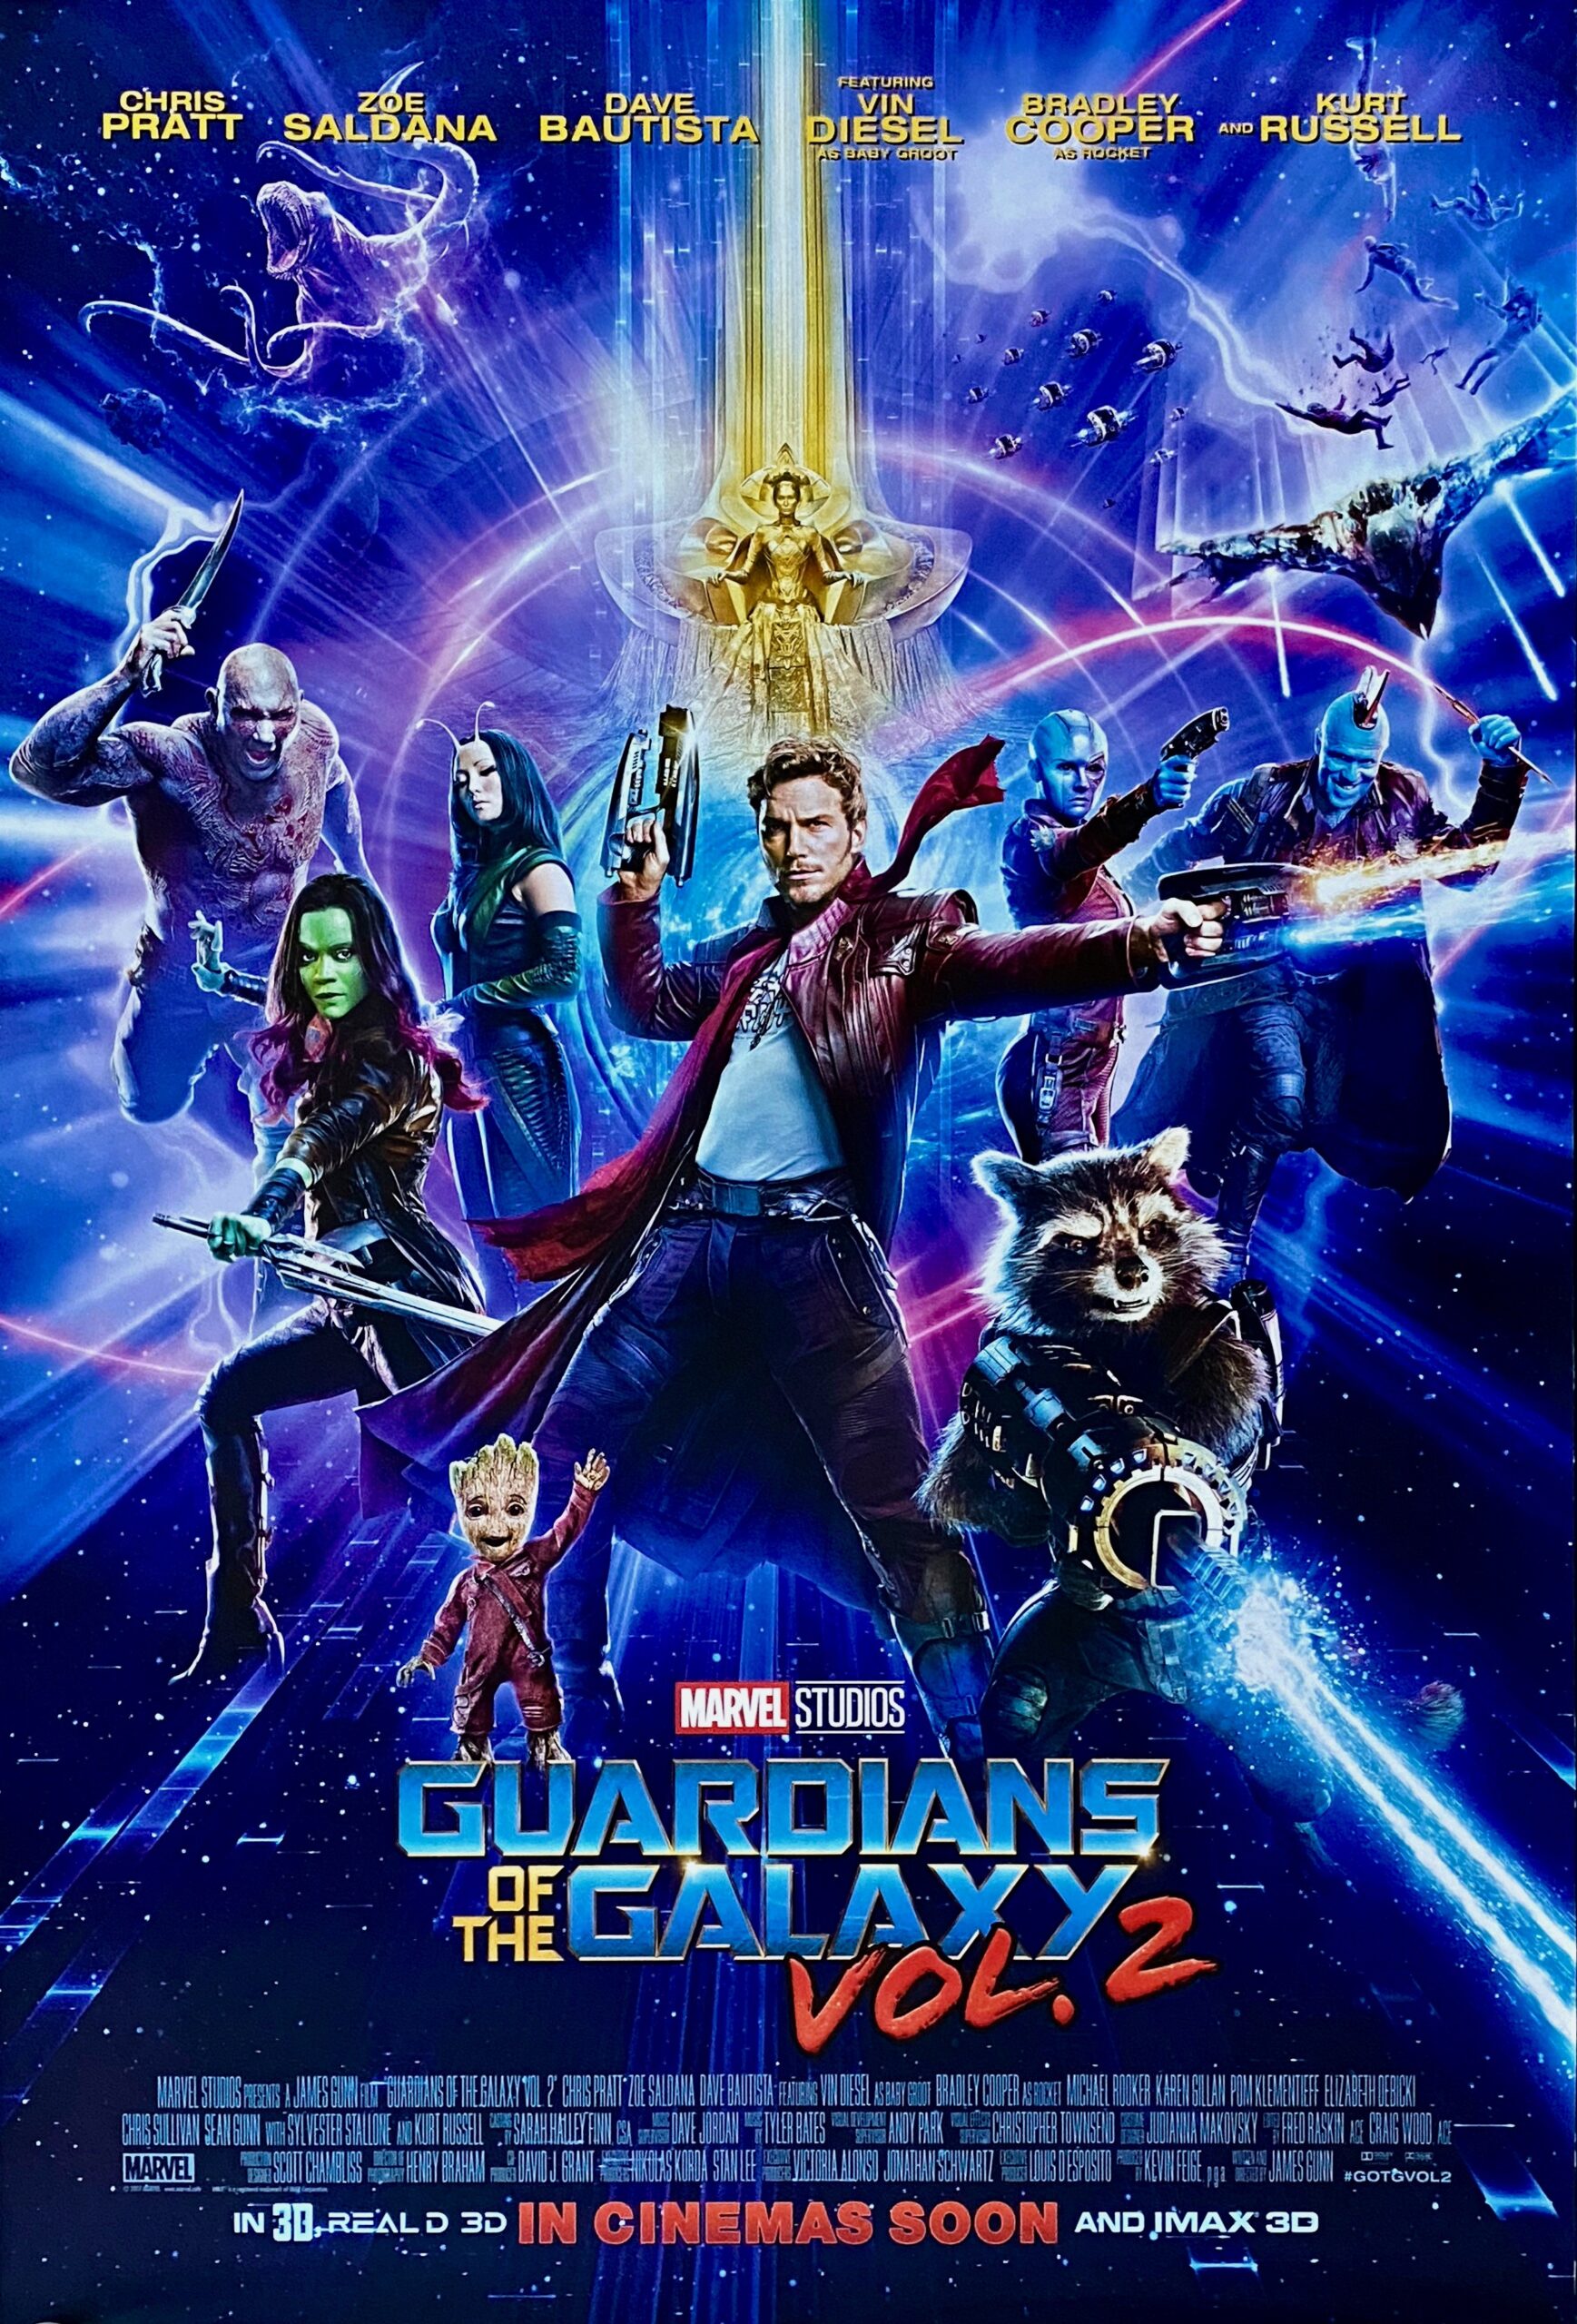 2017 2 Theatrical Release 11x17 Movie Poster Guardians of the Galaxy Vol 